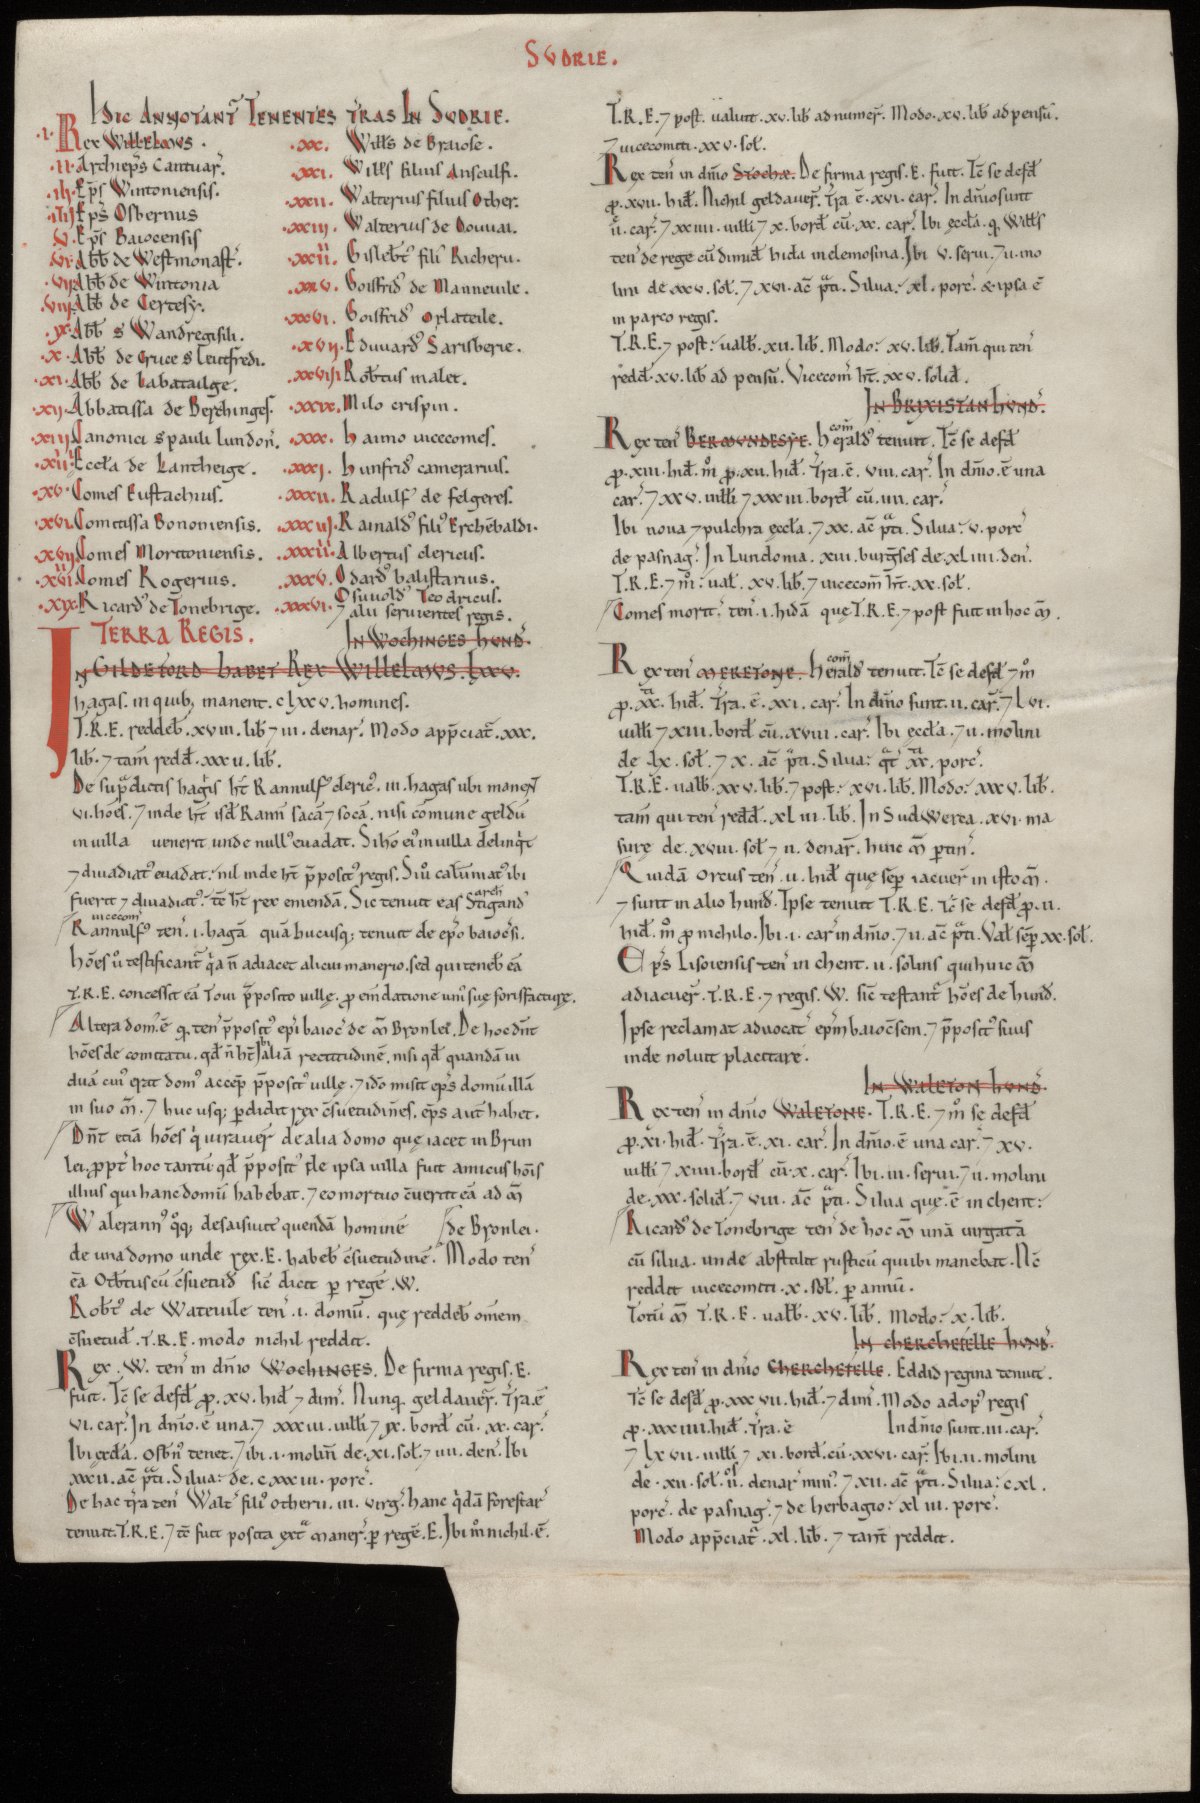 A facsimile copy of the Domesday Book. It is missing a square from the bottom left hand corner. Some of the text is black and some is red.